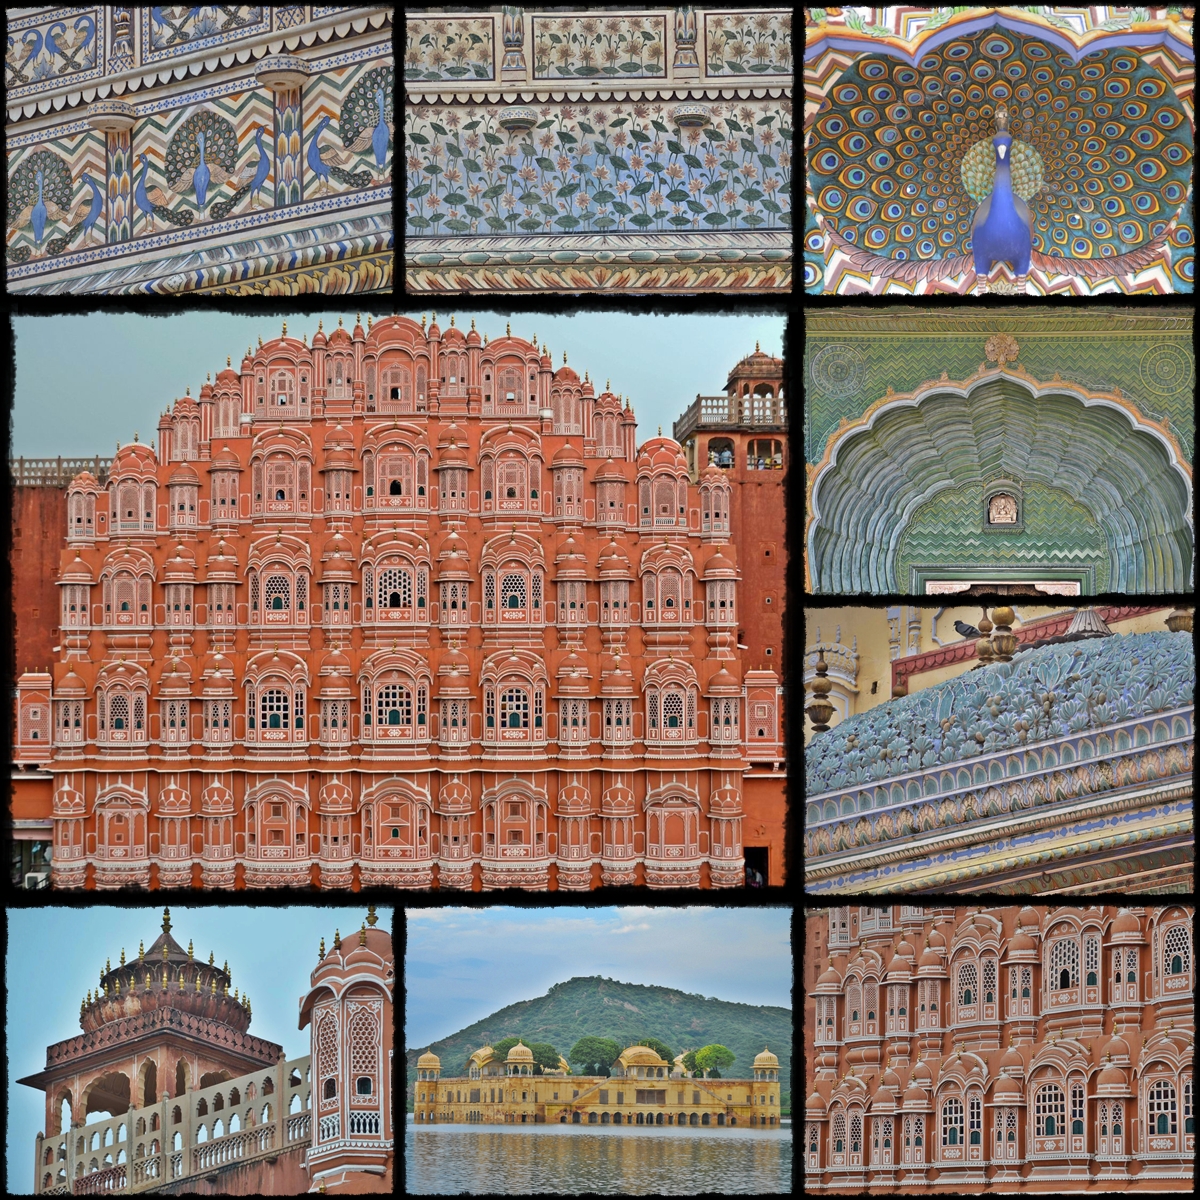 THE ROSE CITY OF JAIPUR > AMBER FORT > HAVA MAHAL (called Palace of Winds or Palace of the Breeze) > JANTAR MANTAR ASTRONOMICAL OBSERVATORY > JAIPUR CITY PALACE